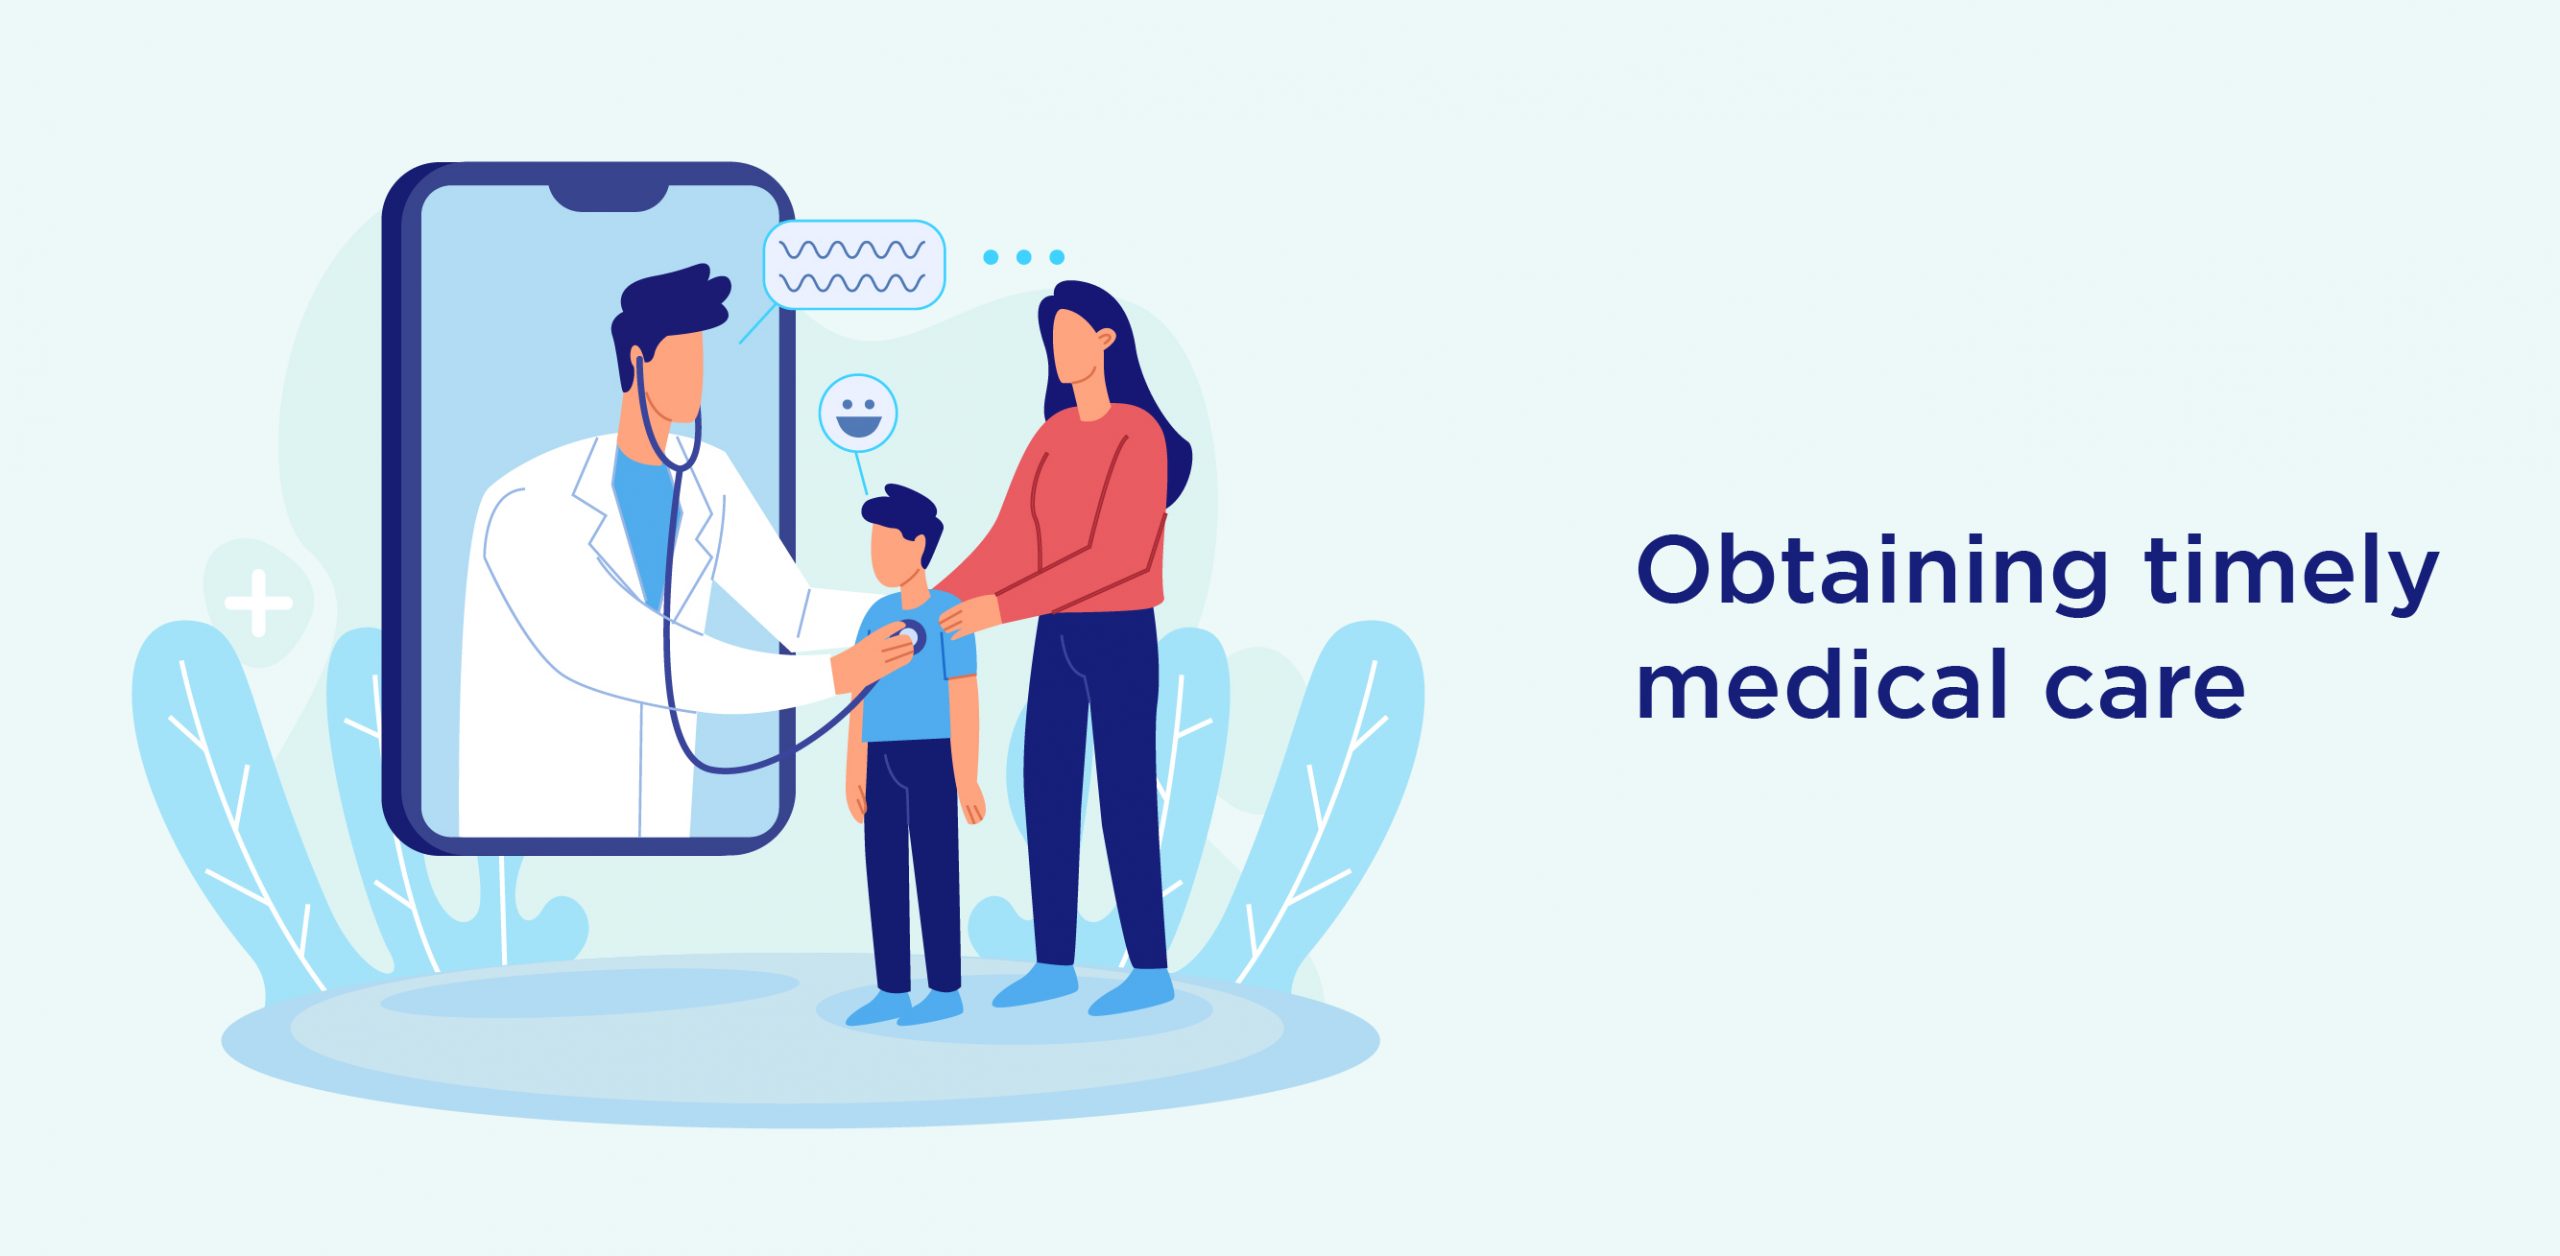 Obtaining timely medical care